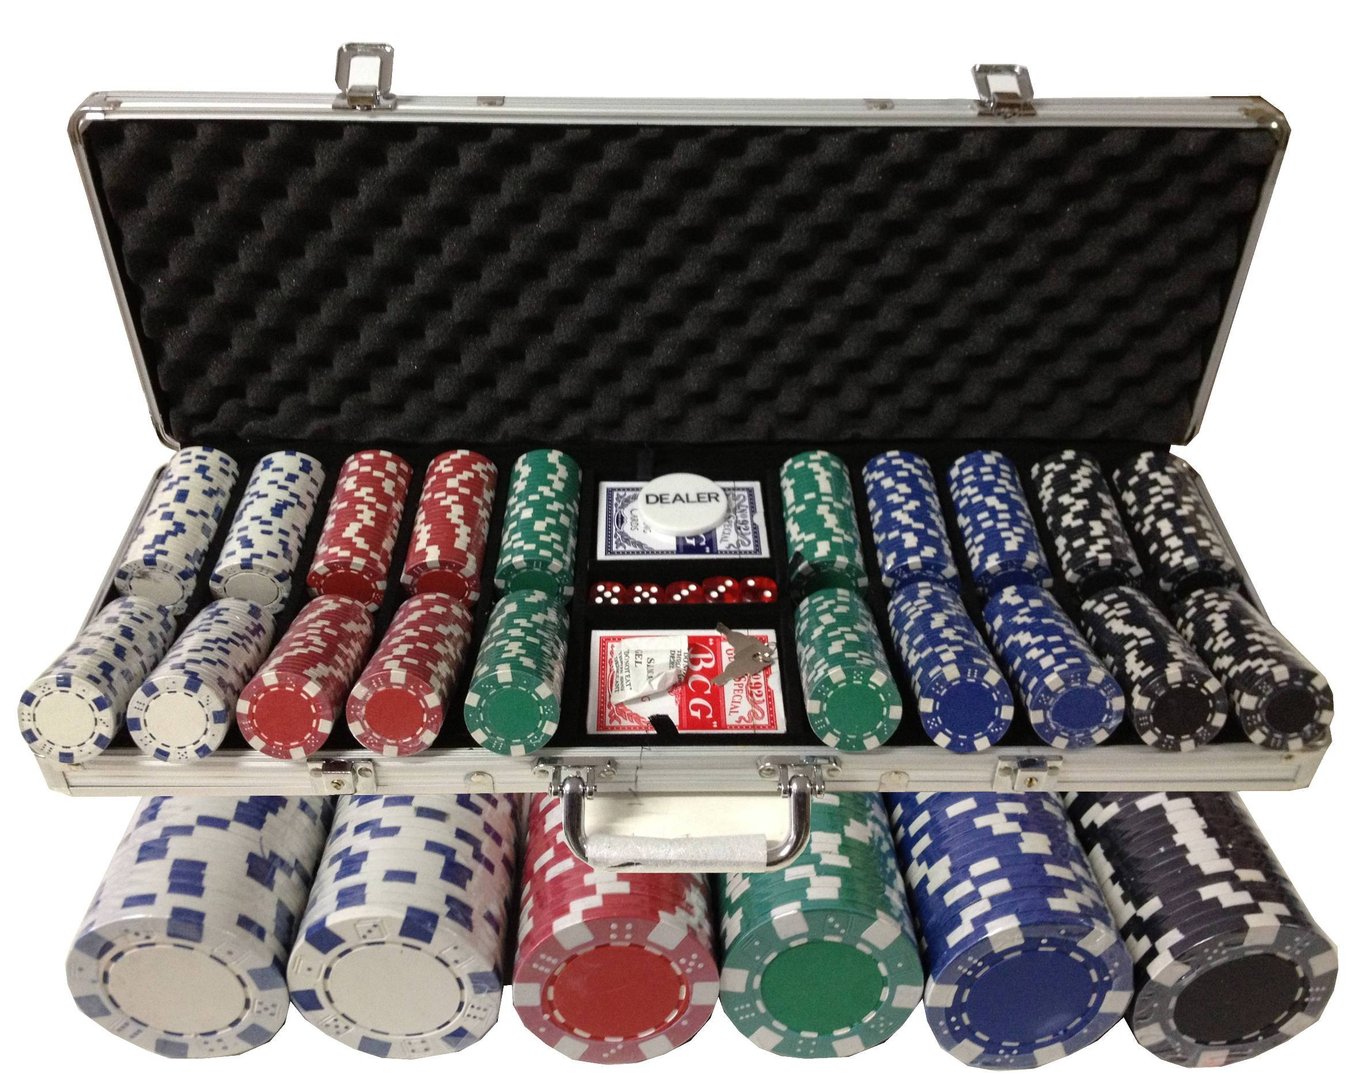 Top 6 Poker Chips Set: Get The Perfect Set For Your Next Home Game!